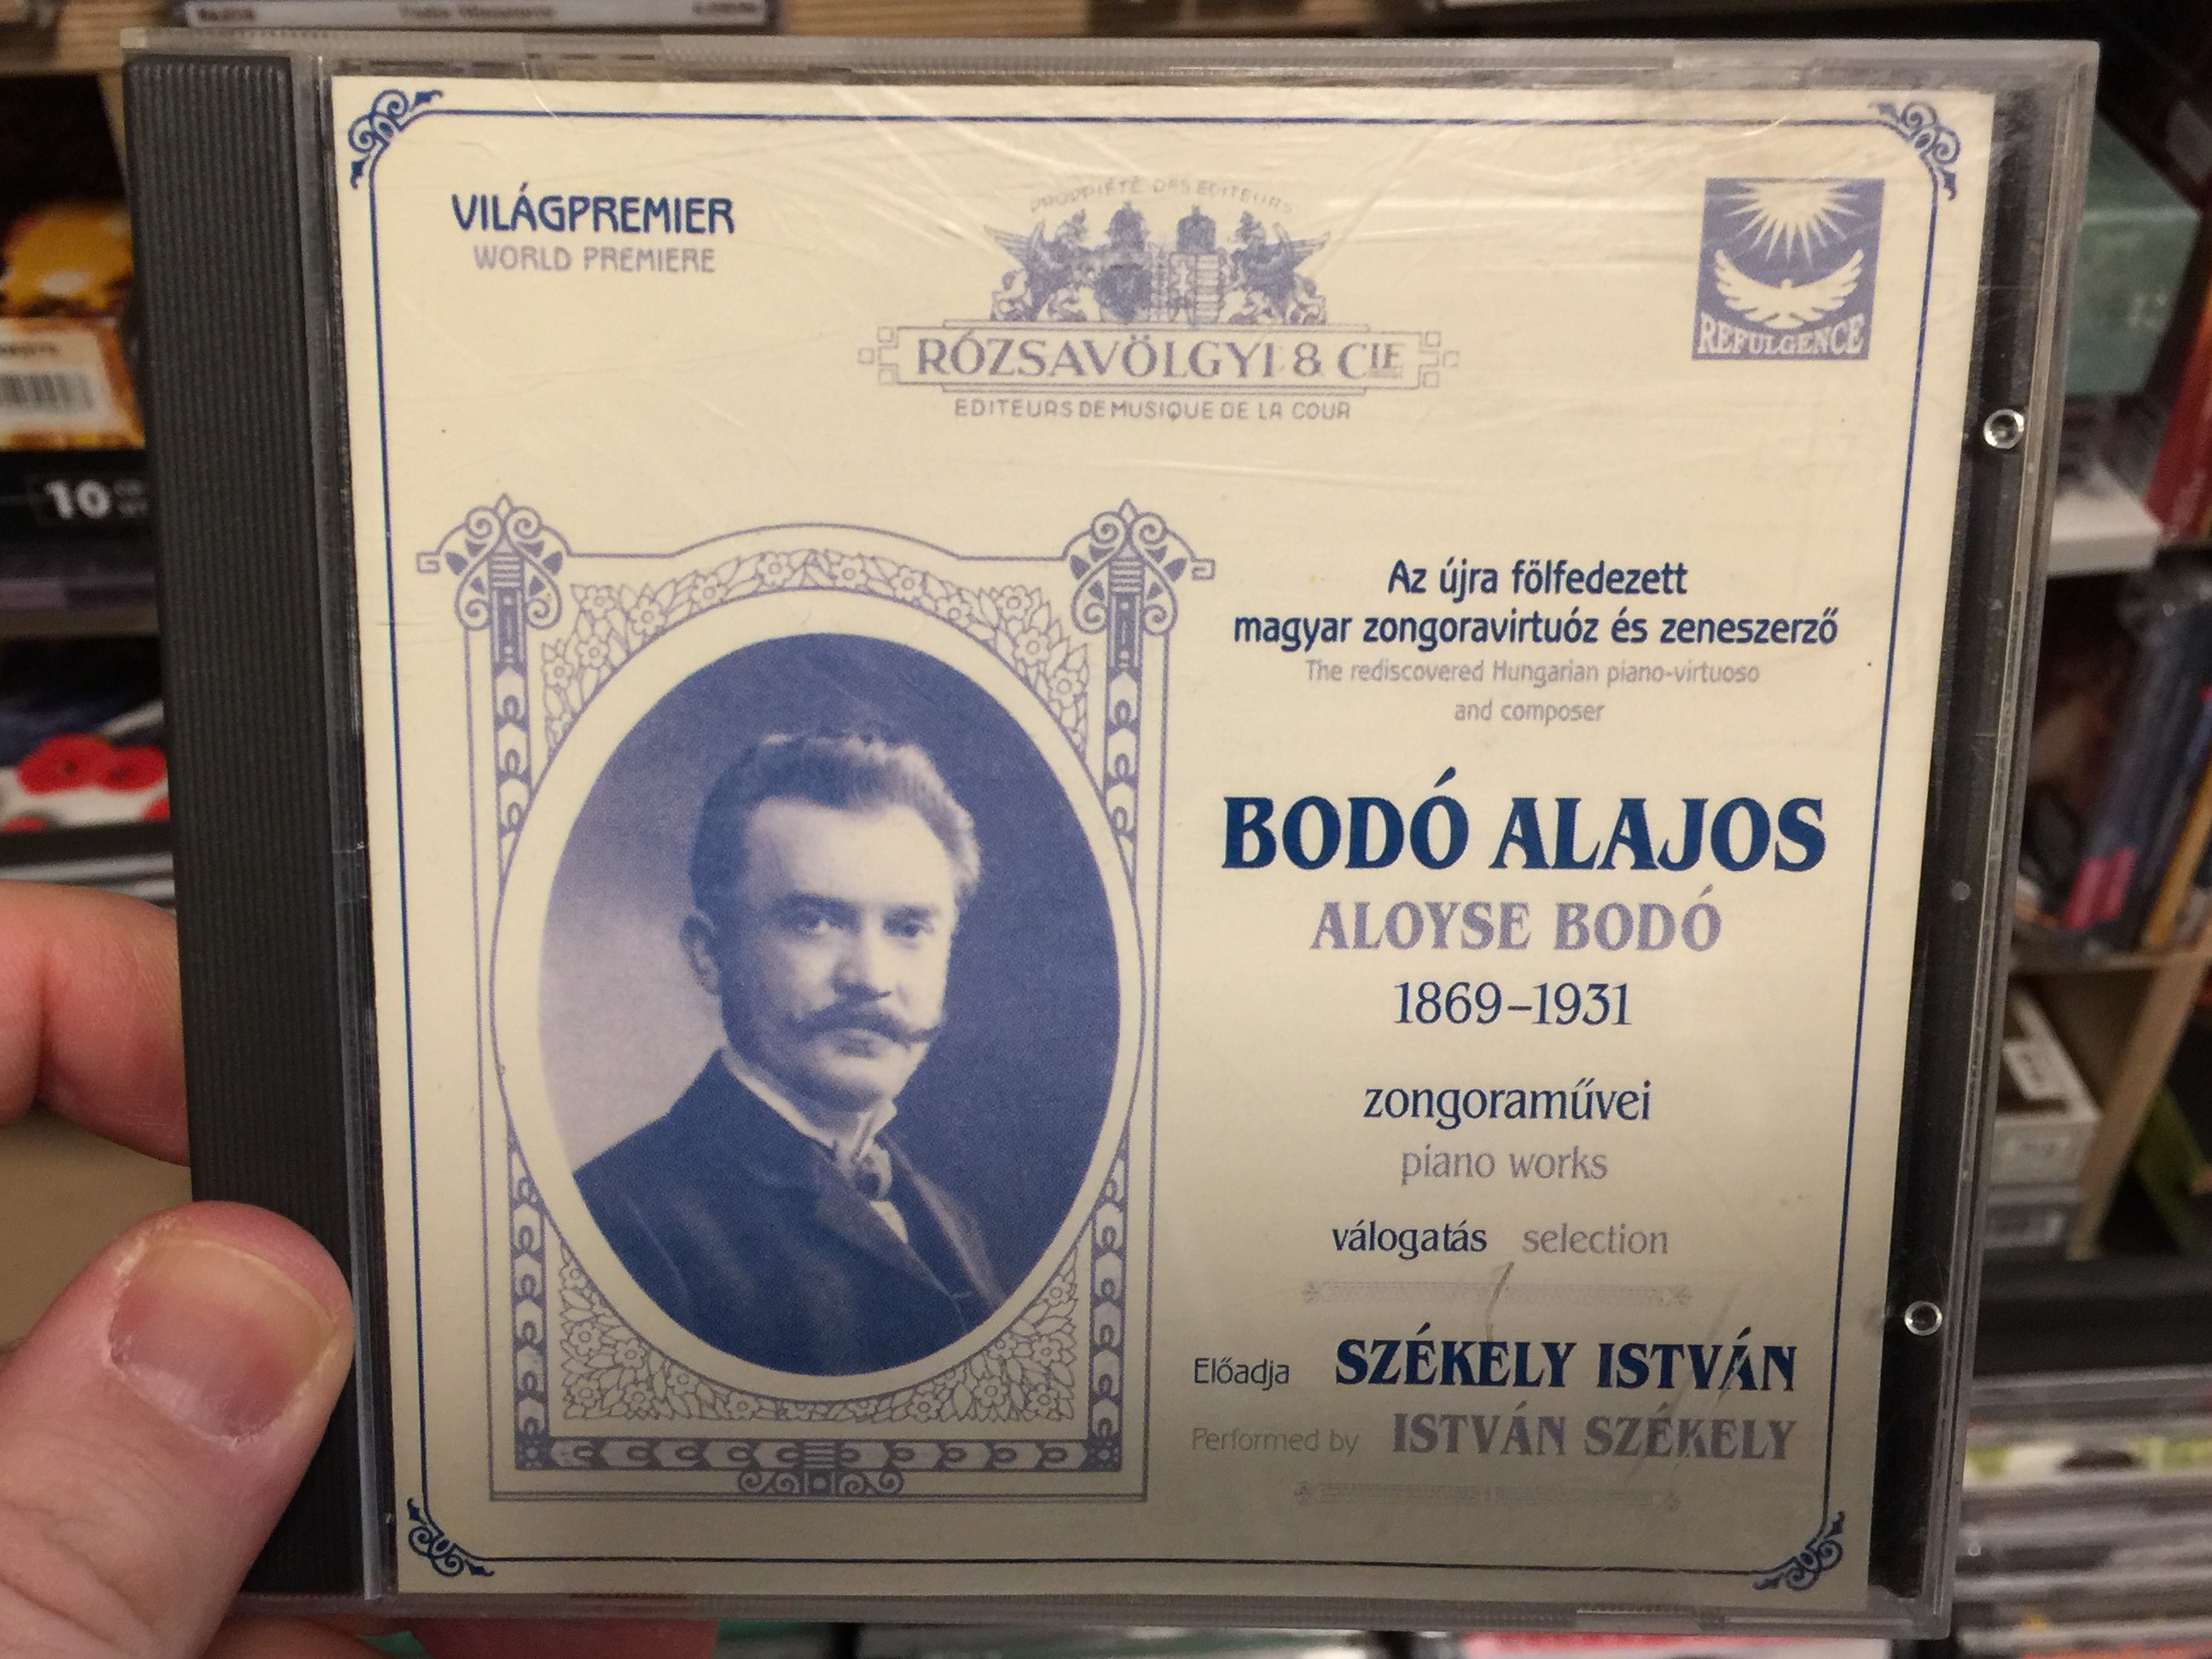 the-rediscovered-hungarian-piano-virtuoso-and-composer-bodo-alajos-1869-1931-piano-works-performed-by-szekely-istvan-refulgence-audio-cd-ref-0002-1-.jpg